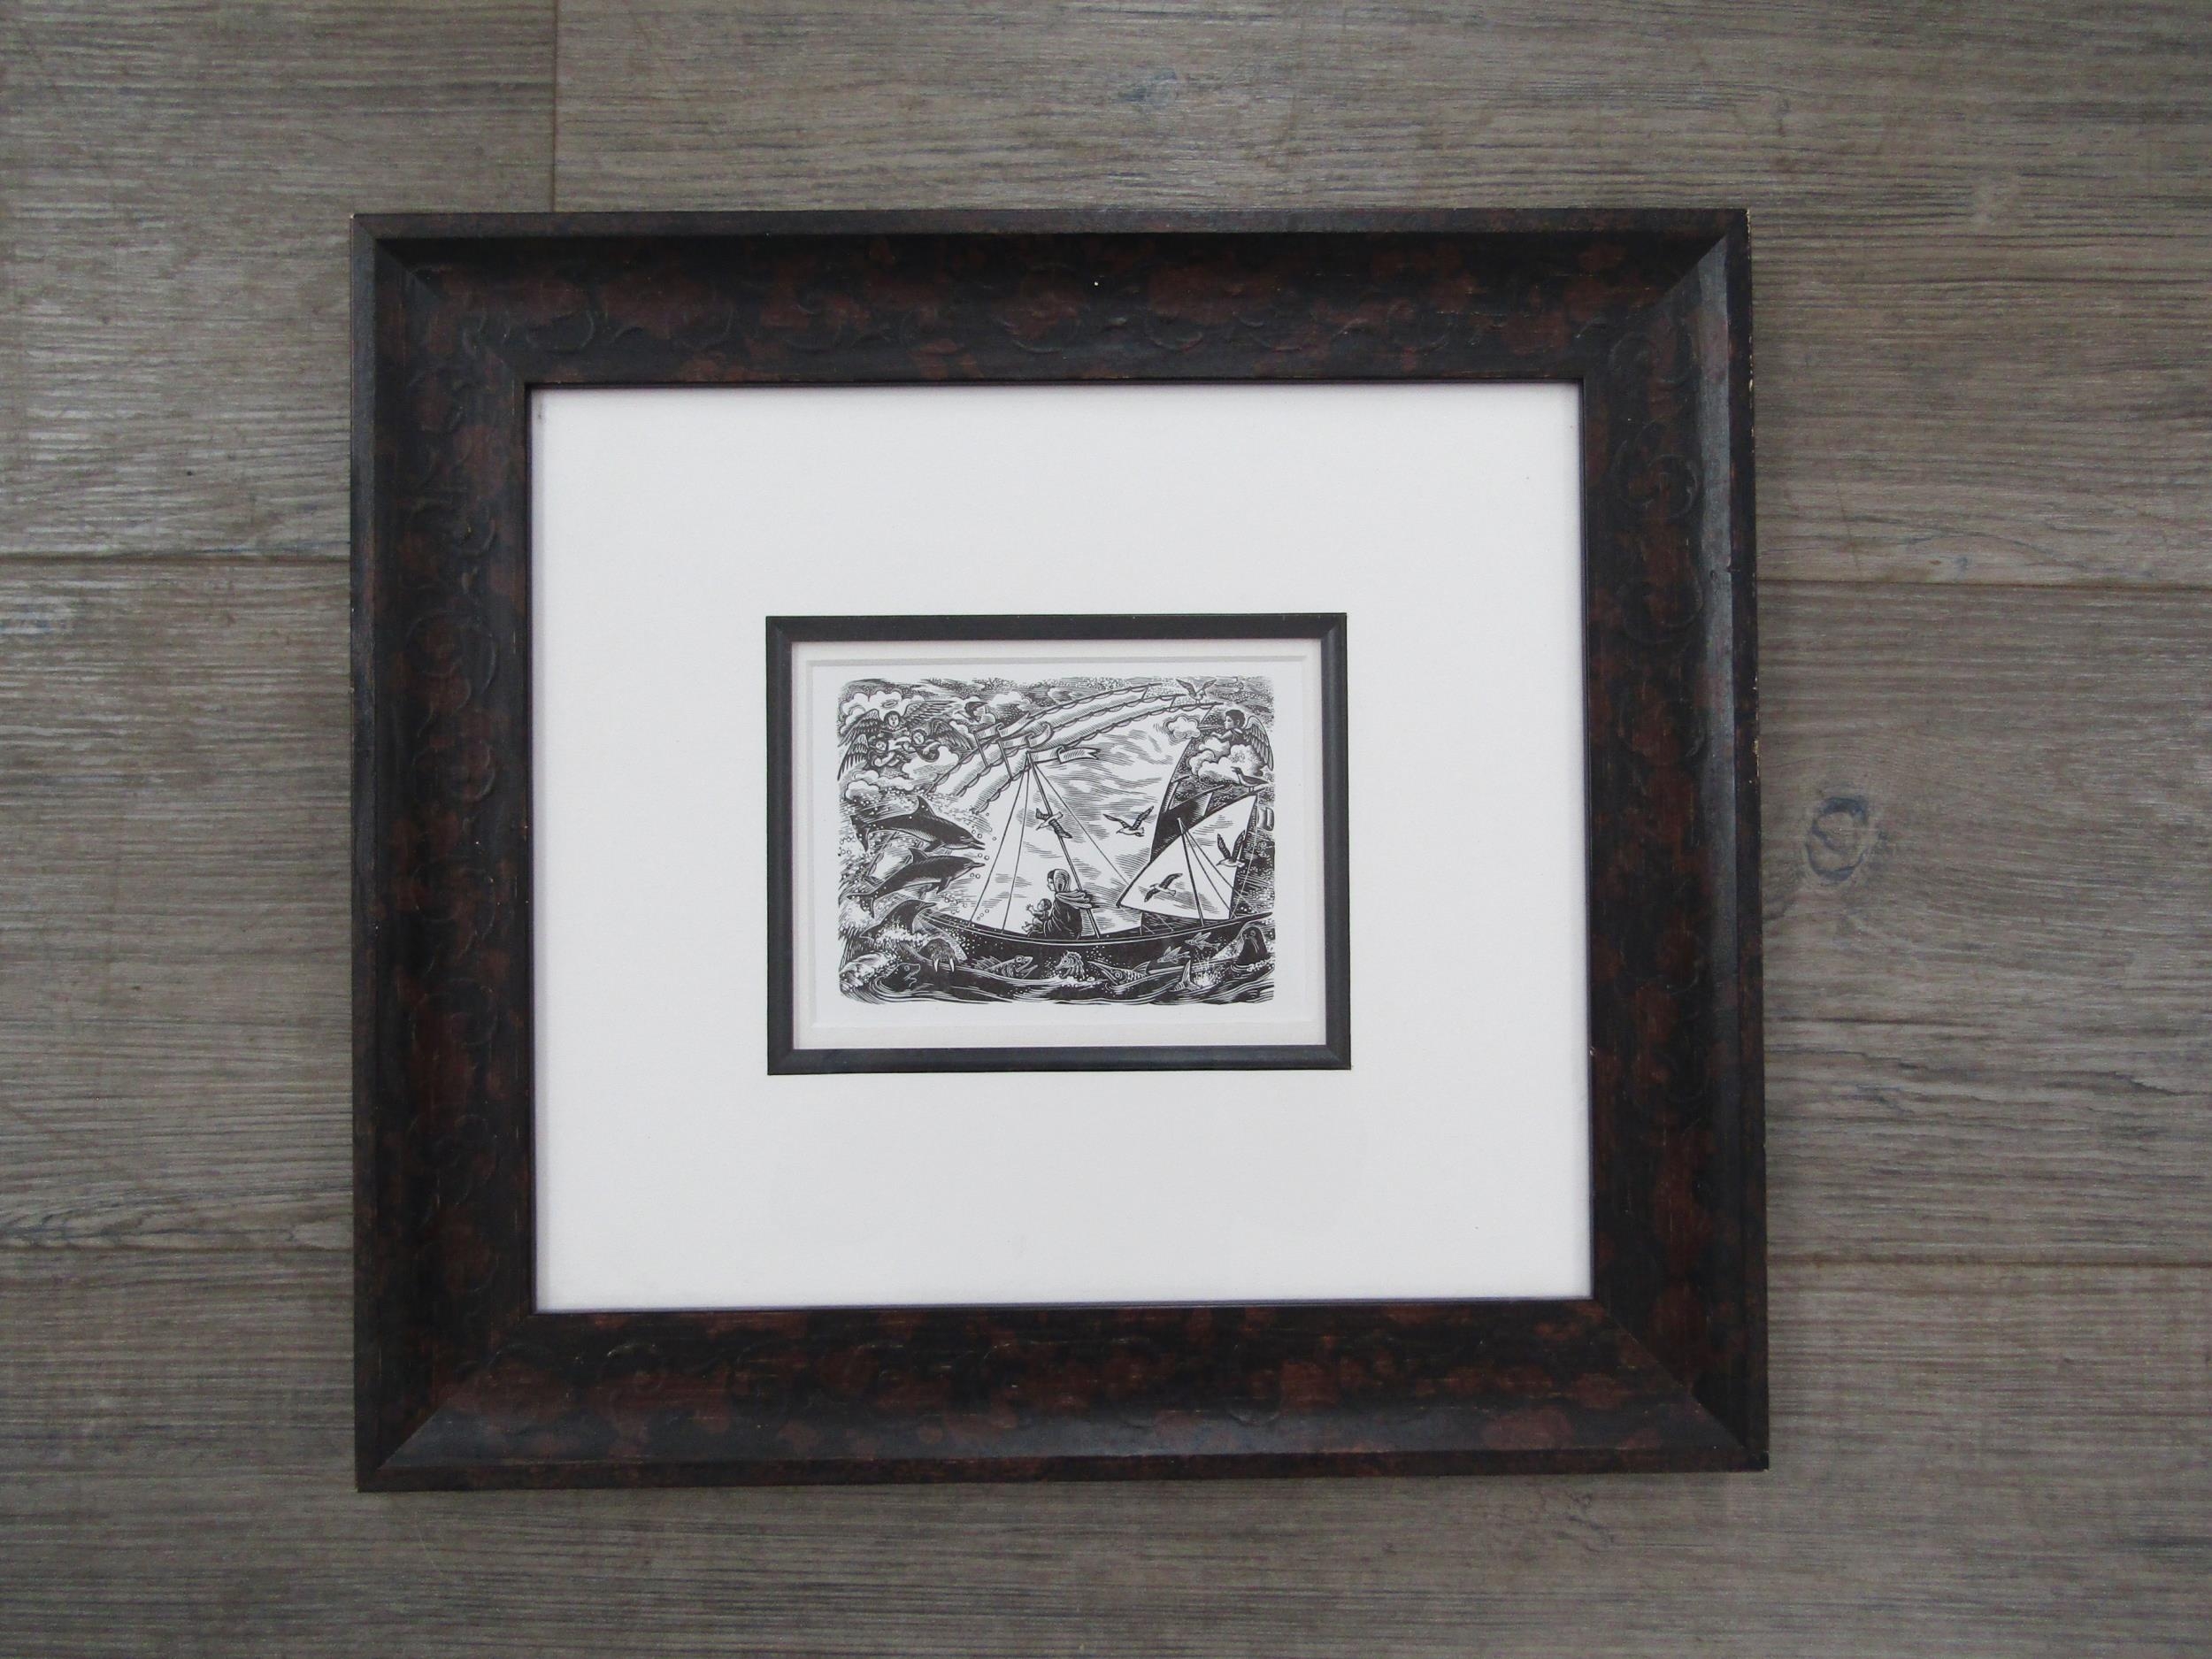 A framed original wood engraving print by Miriam Macgregor published by the Society of wood